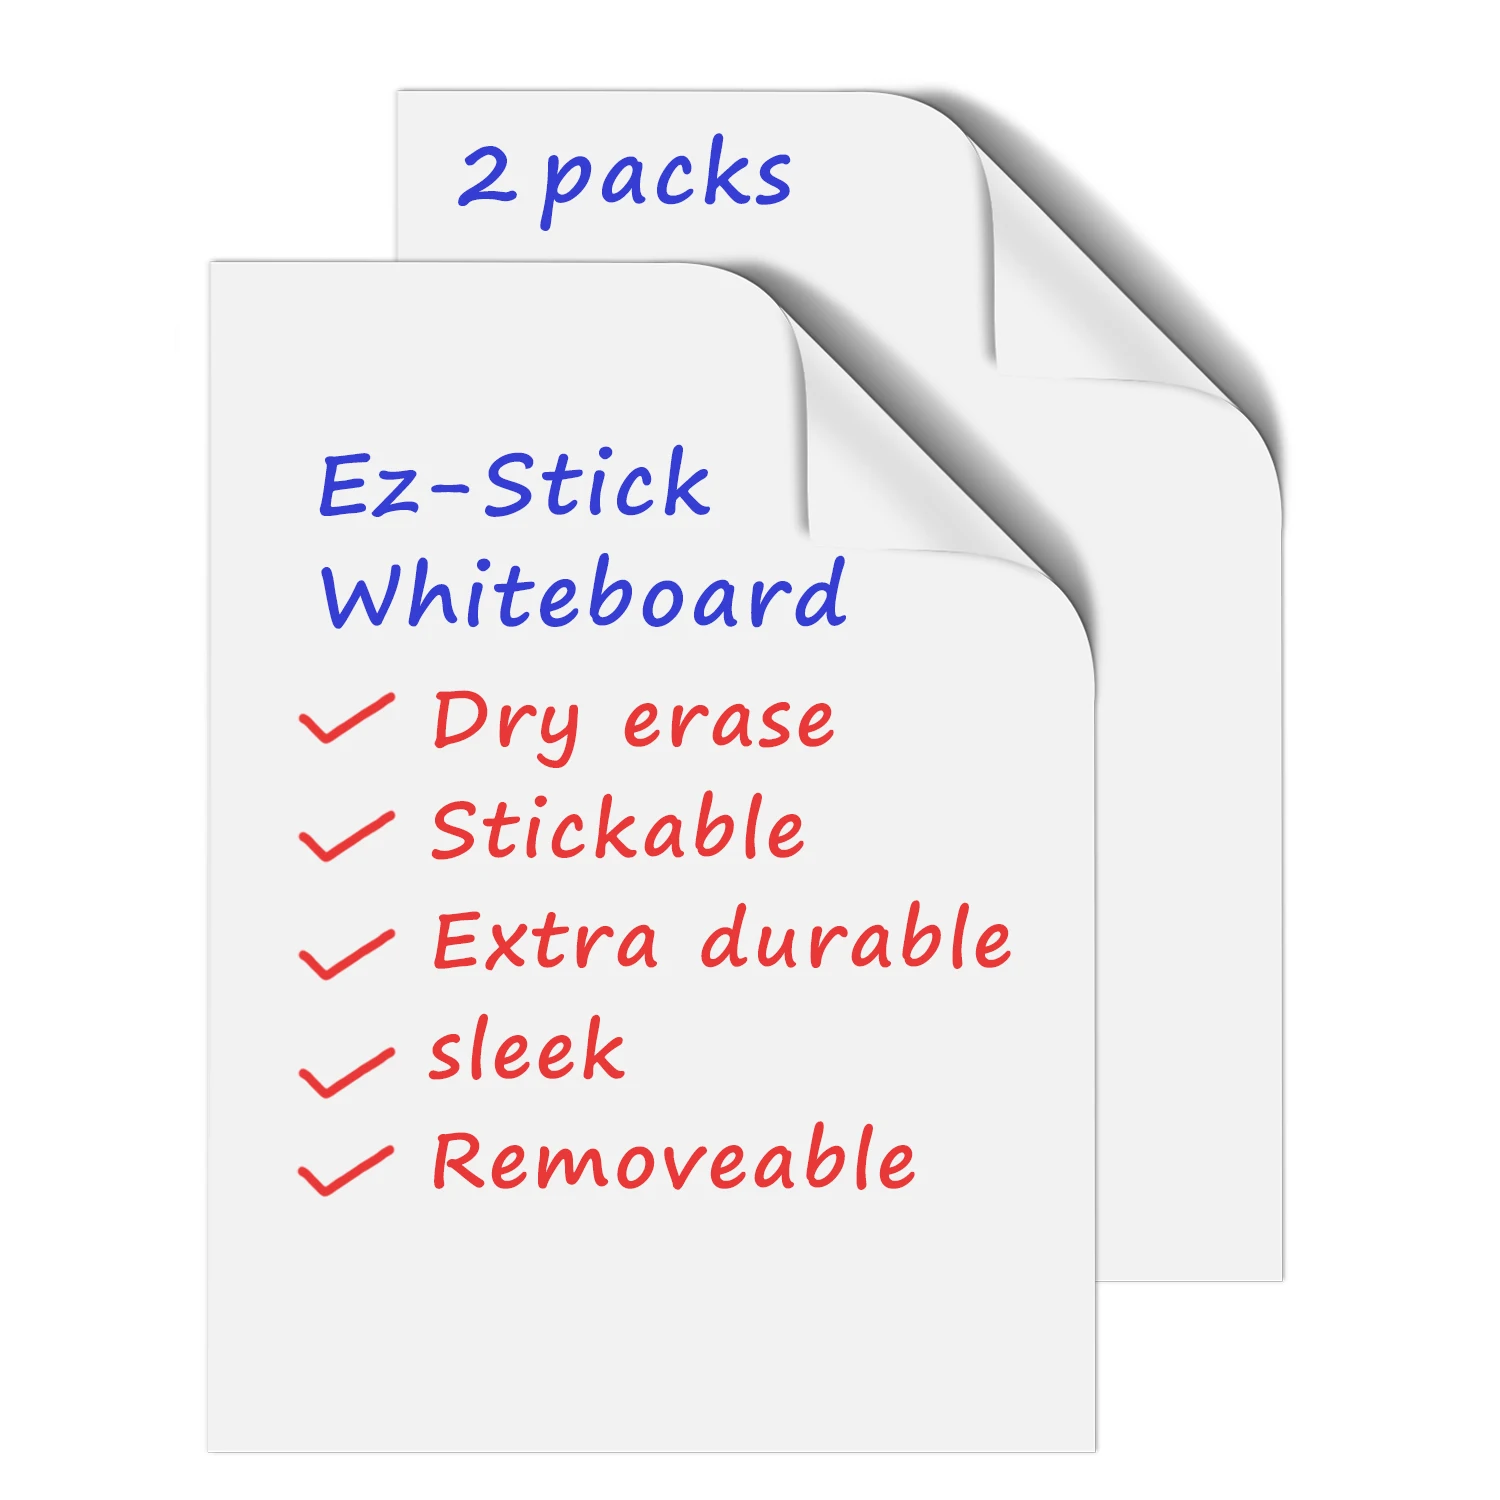 Magnetic Whiteboard Contact Paper, Magnetic Whiteboard Wall